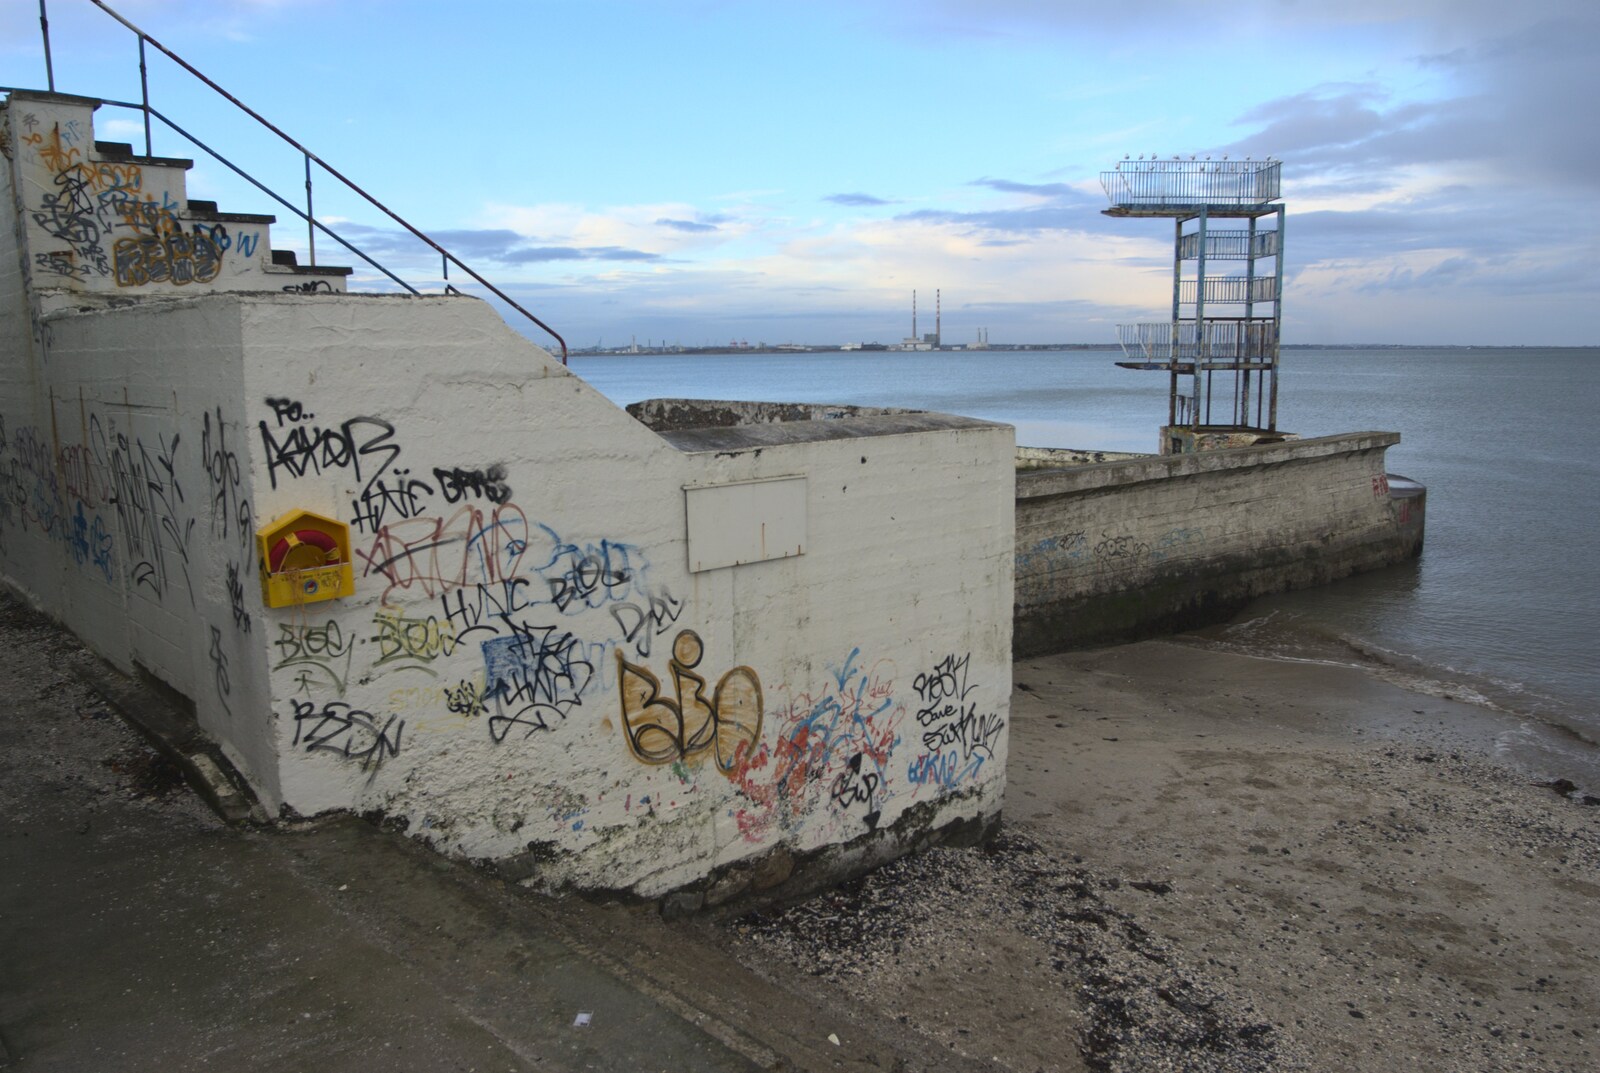 Blackrock Baths and the Winkies from Monkstown Graffiti and Dereliction, County Dublin, Ireland - 26th December 2009